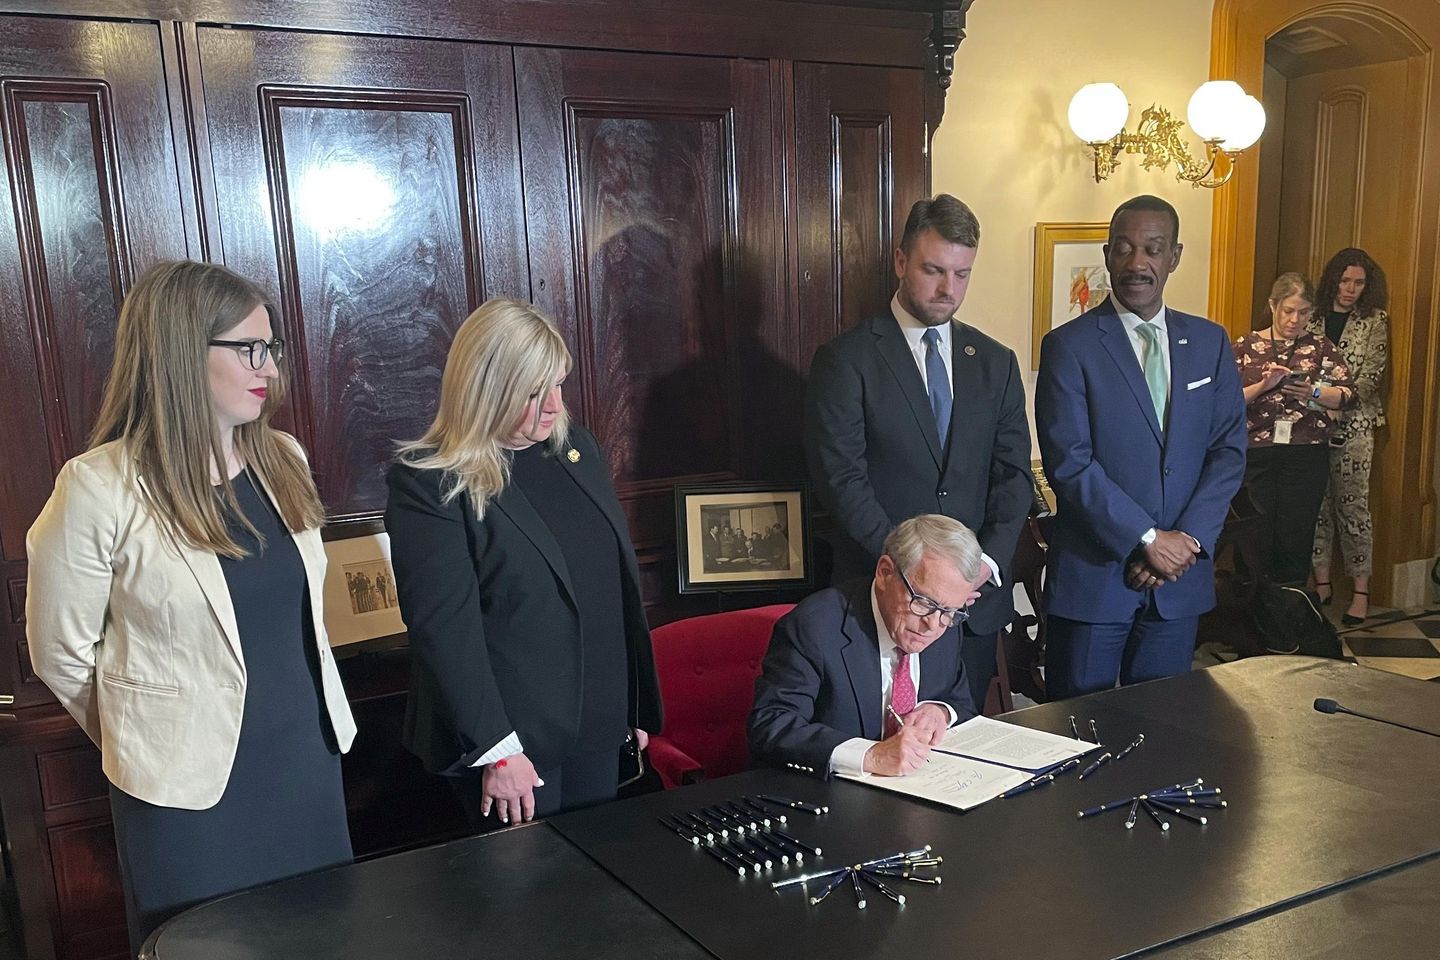 Ohio governor signs rail safety measures into law